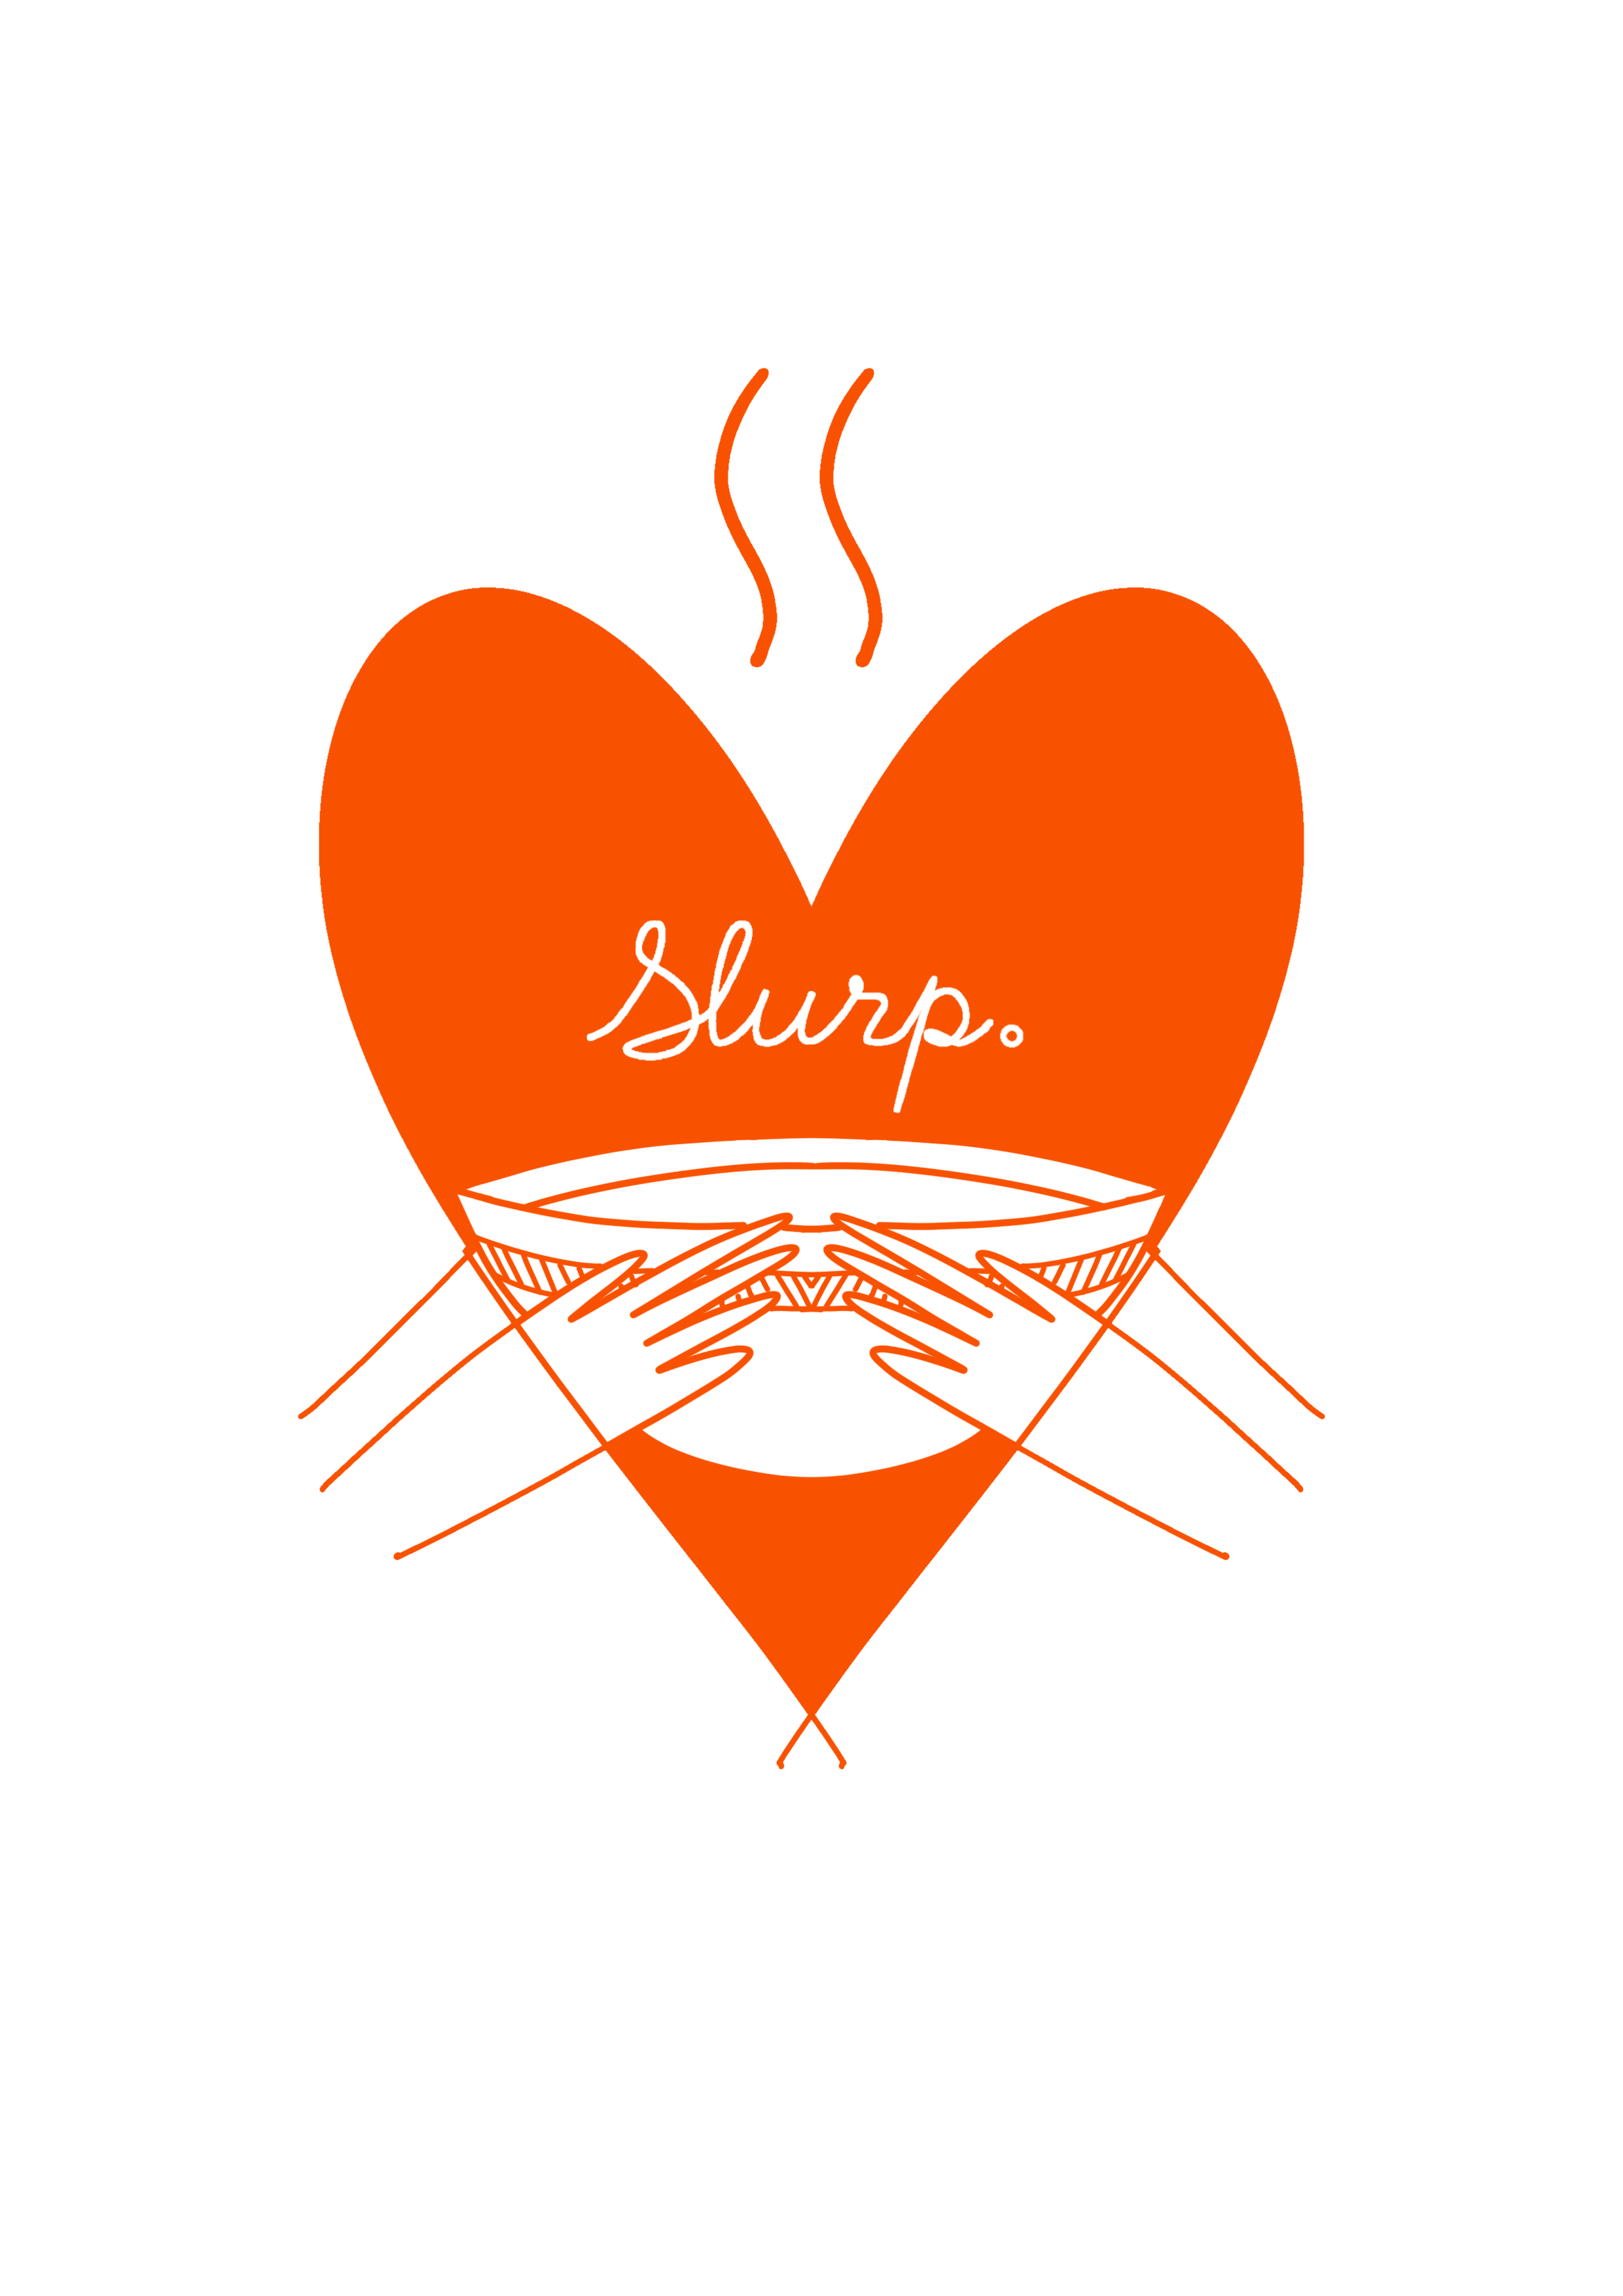 Logo of Slurp: Students for Action on Homelessness